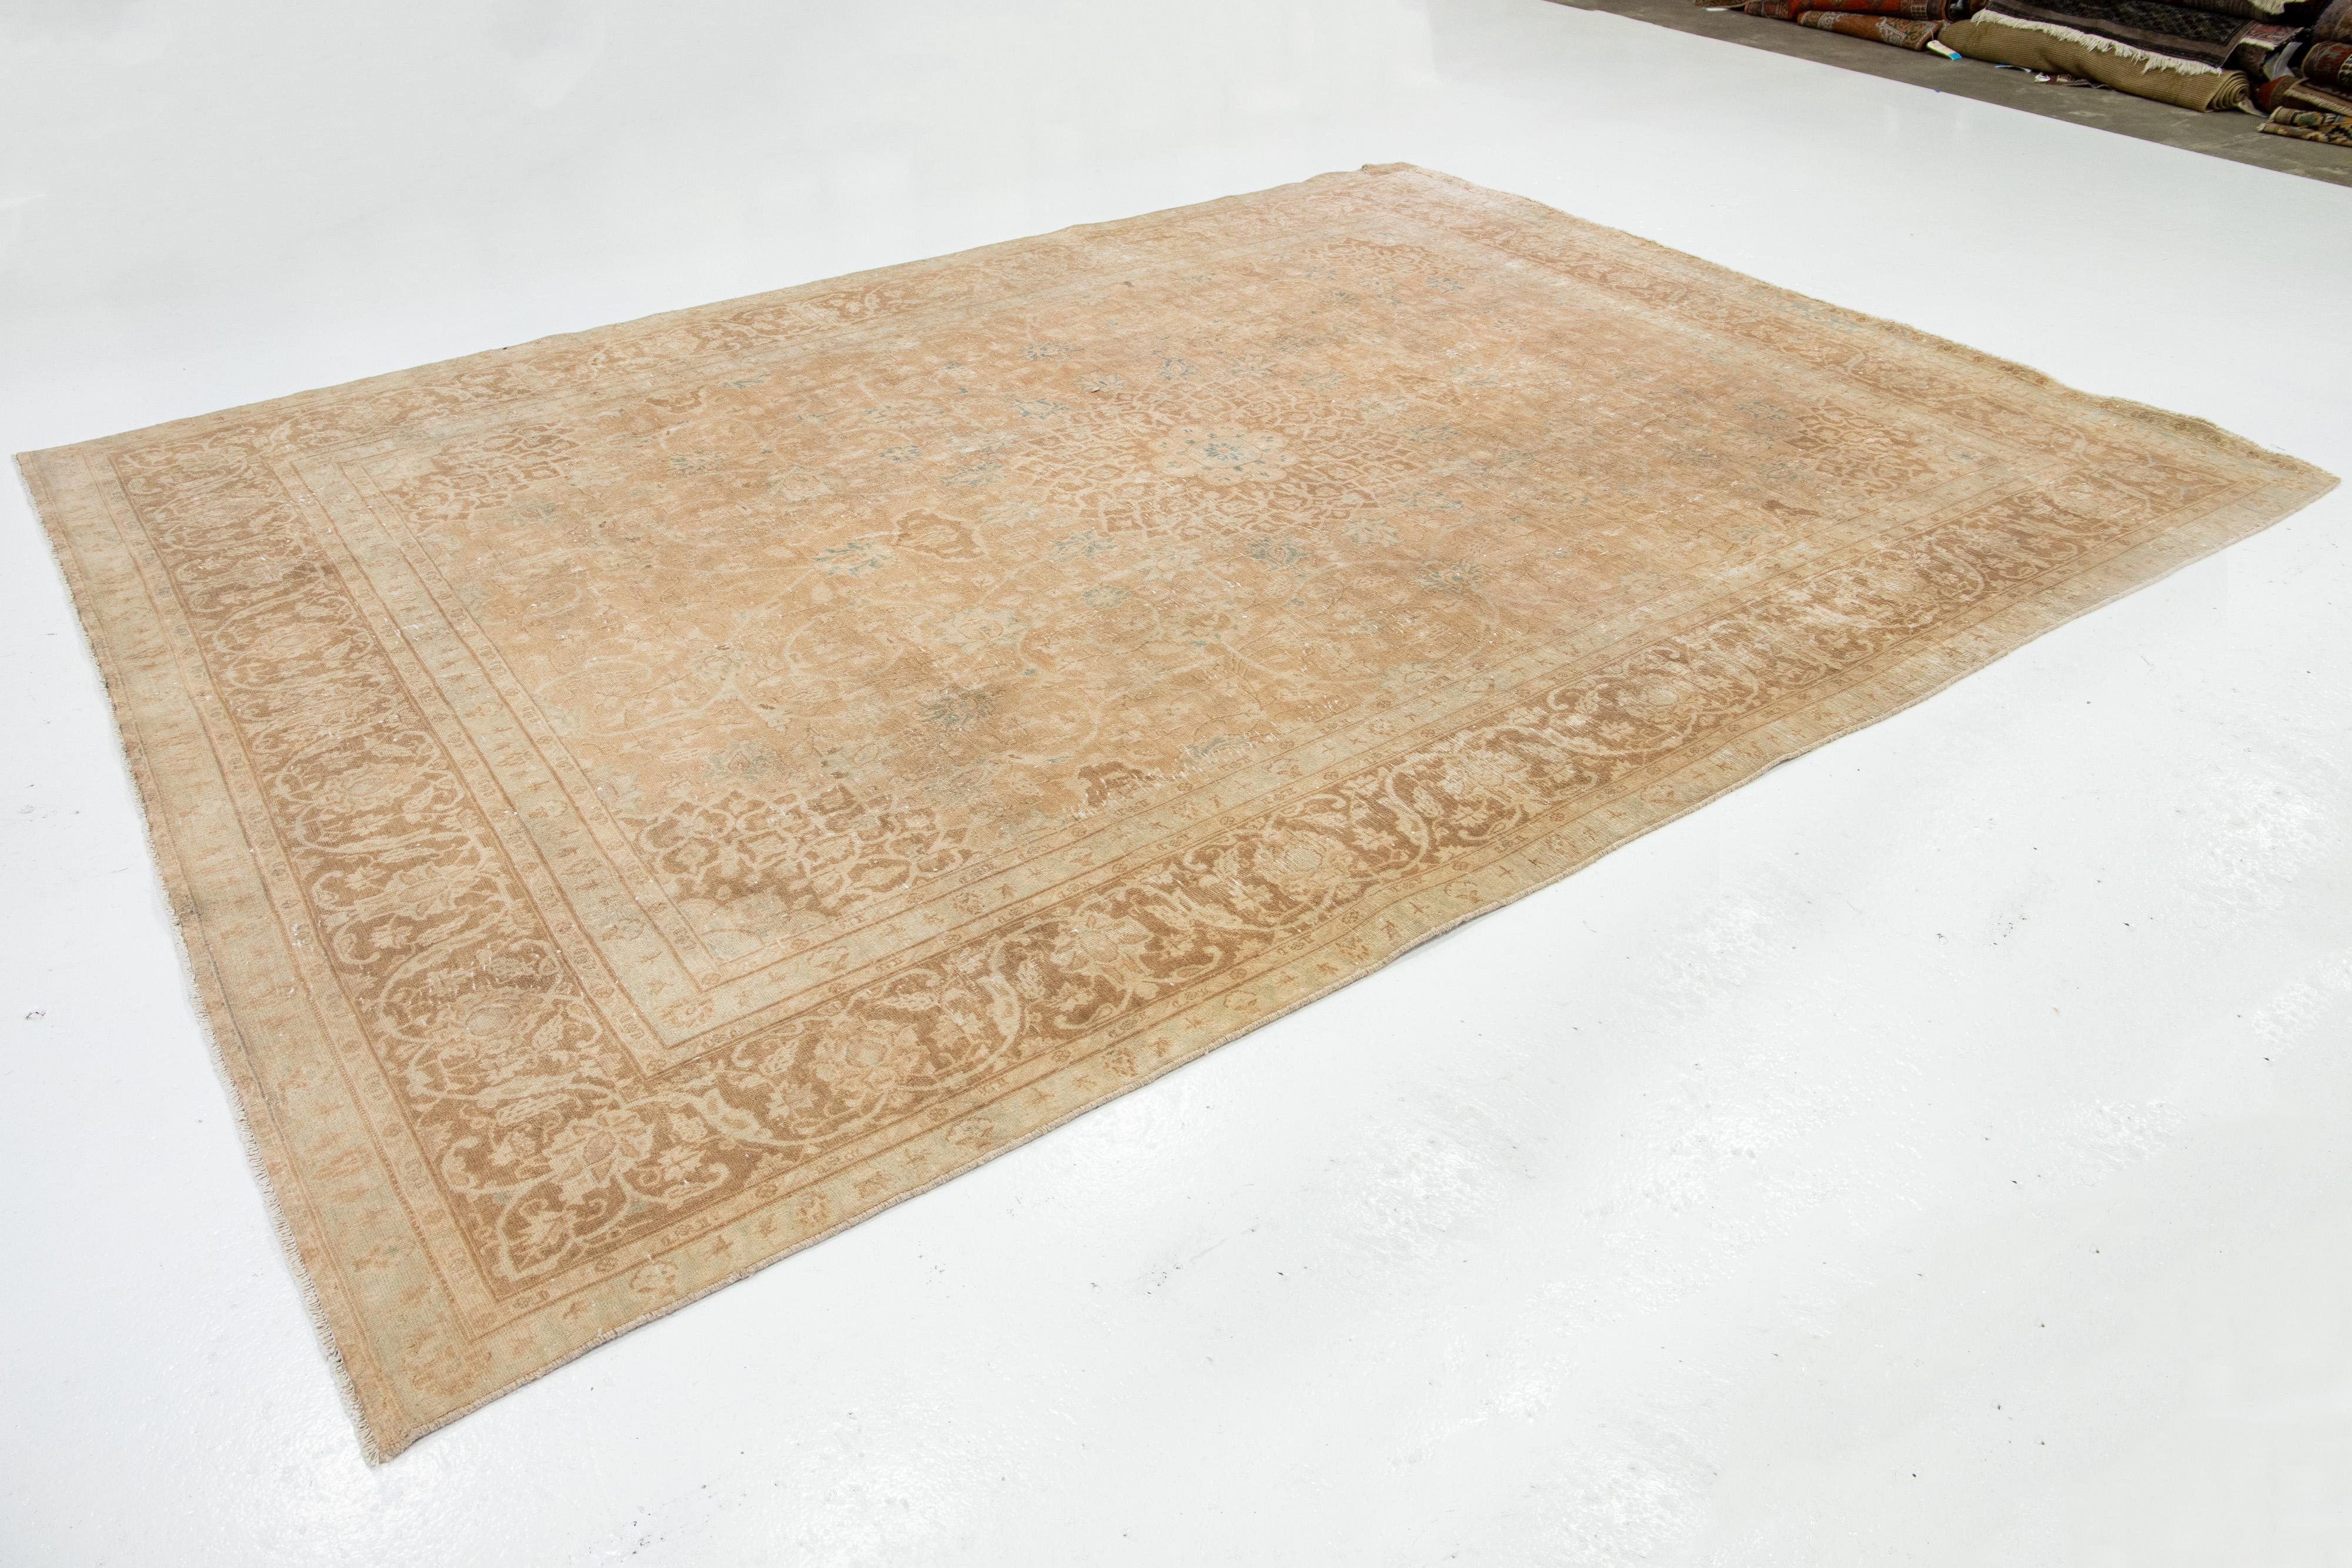 Antique Persian Mashad Handmade Wool Rug In Tan with Rosette Motif  In Good Condition For Sale In Norwalk, CT